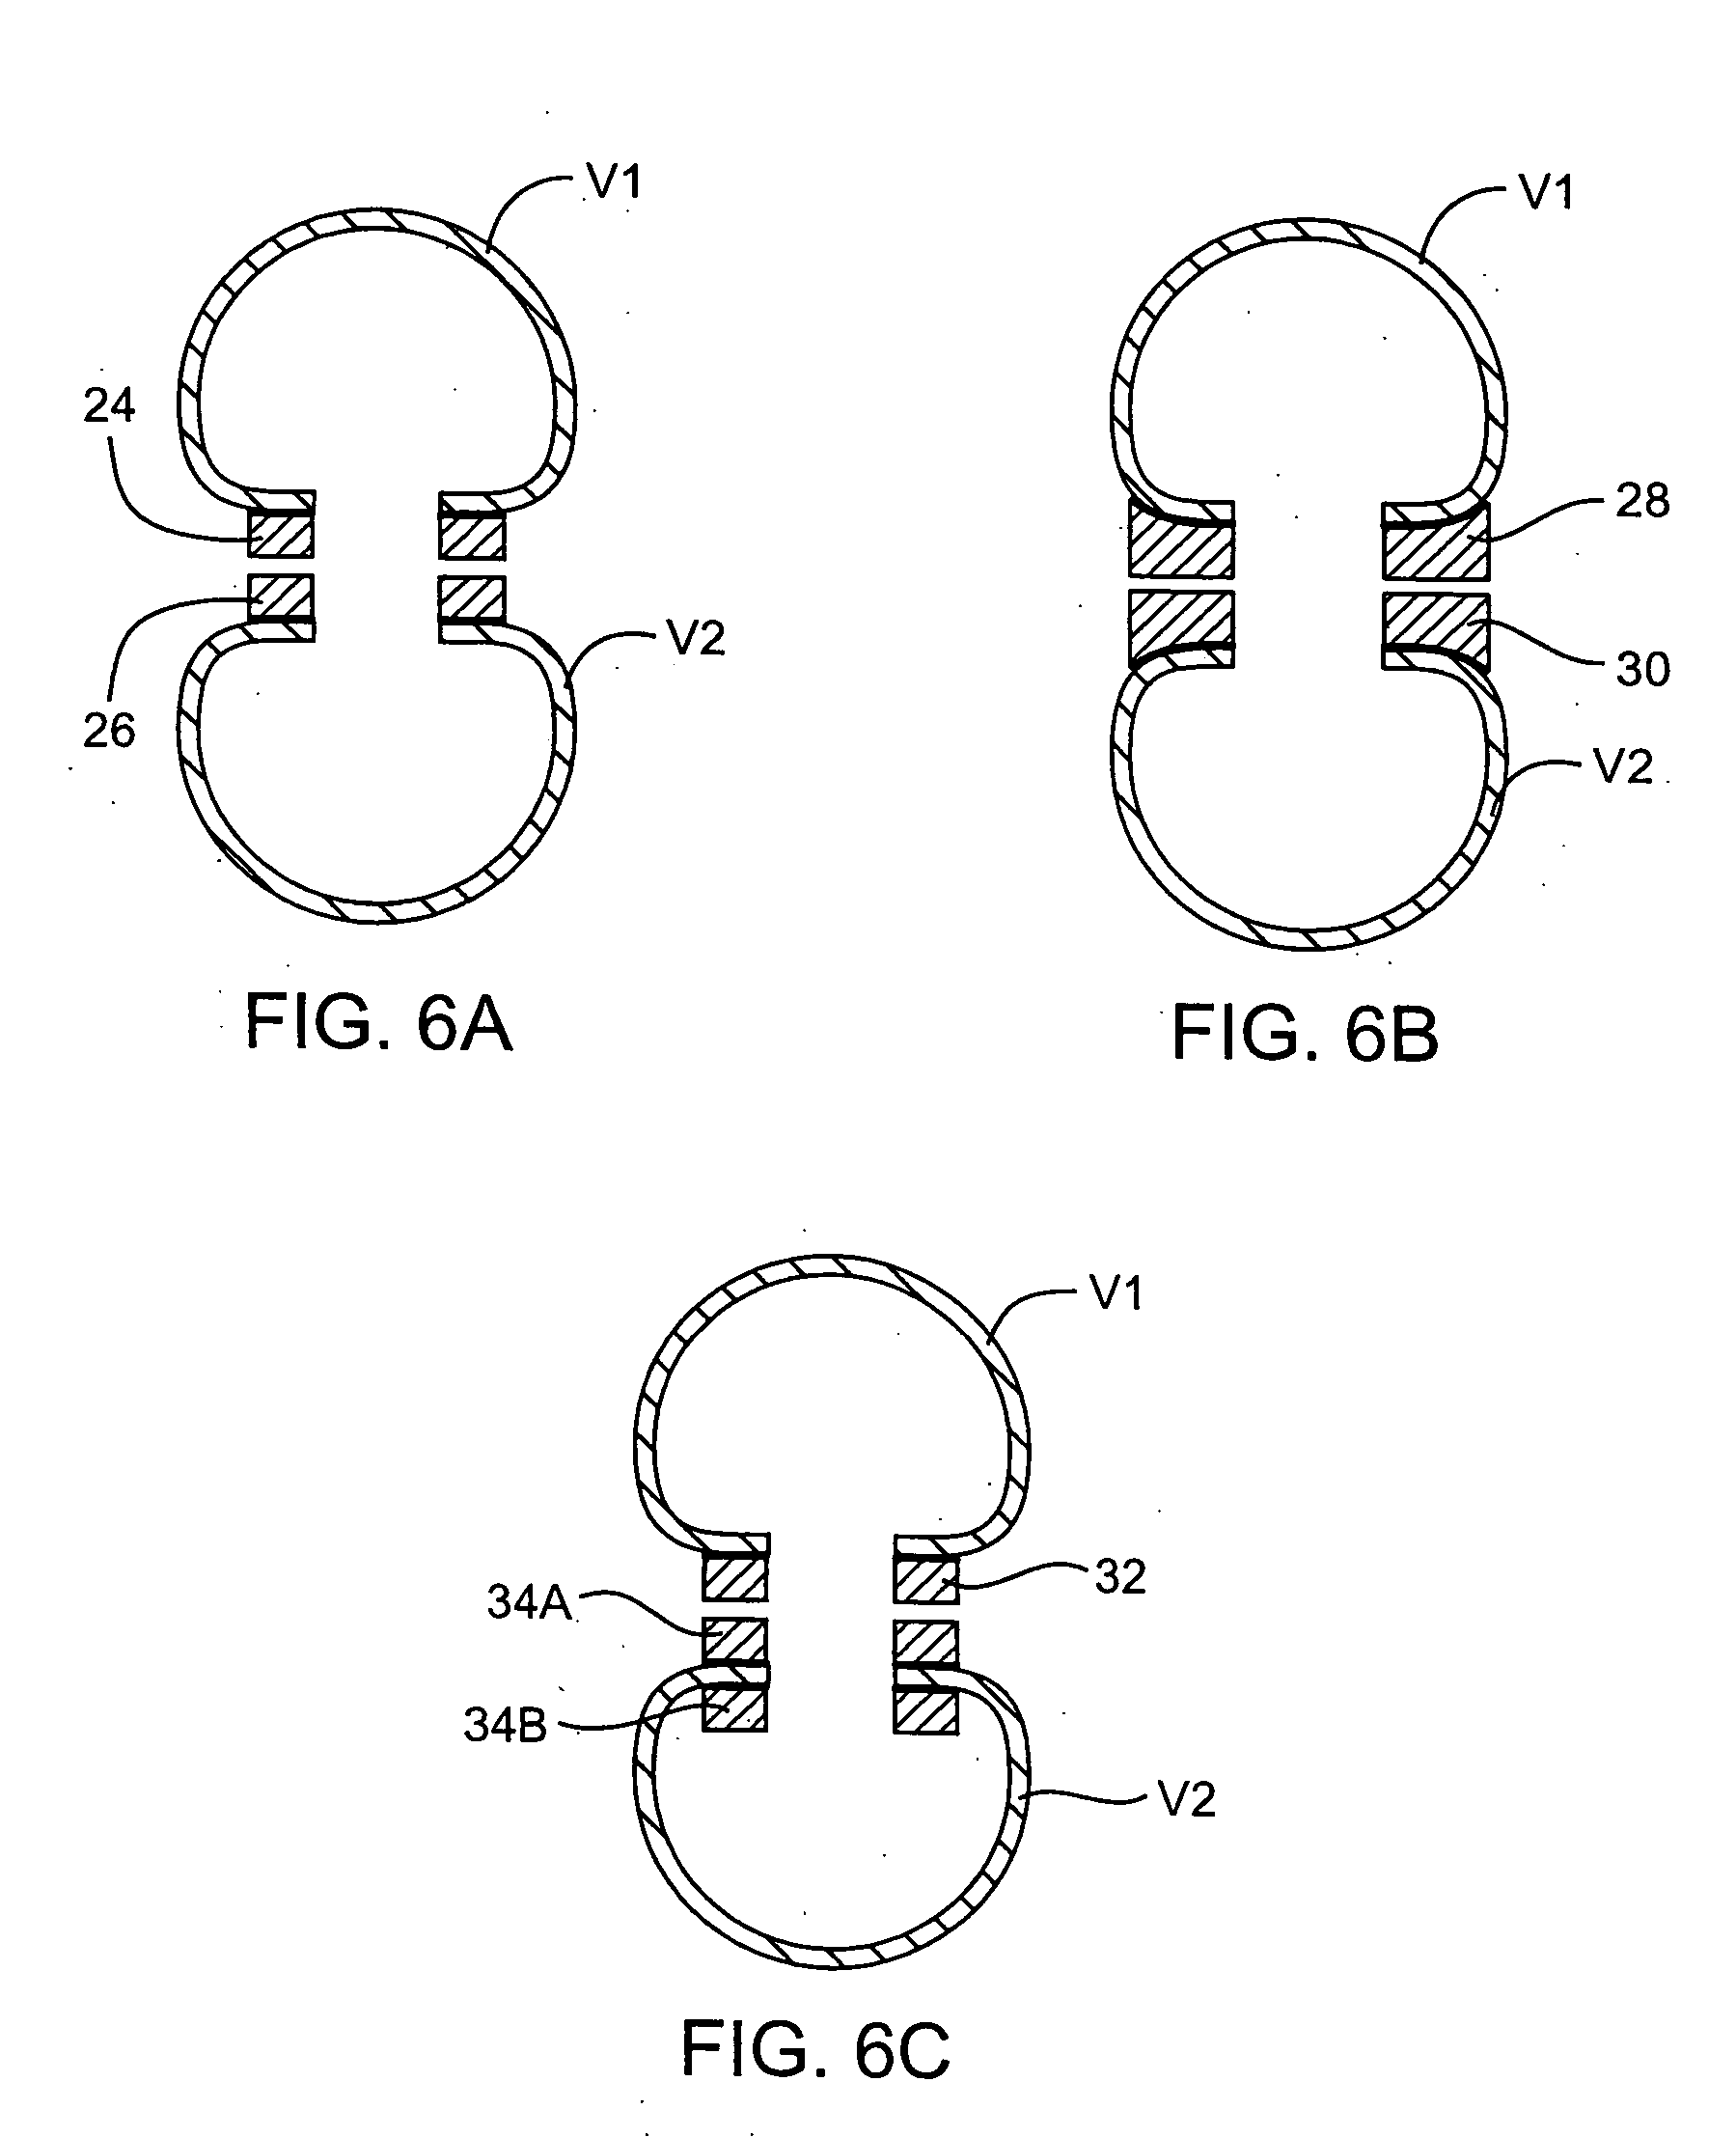 Extravascular anastomotic components and methods for forming magnetic anastomoses